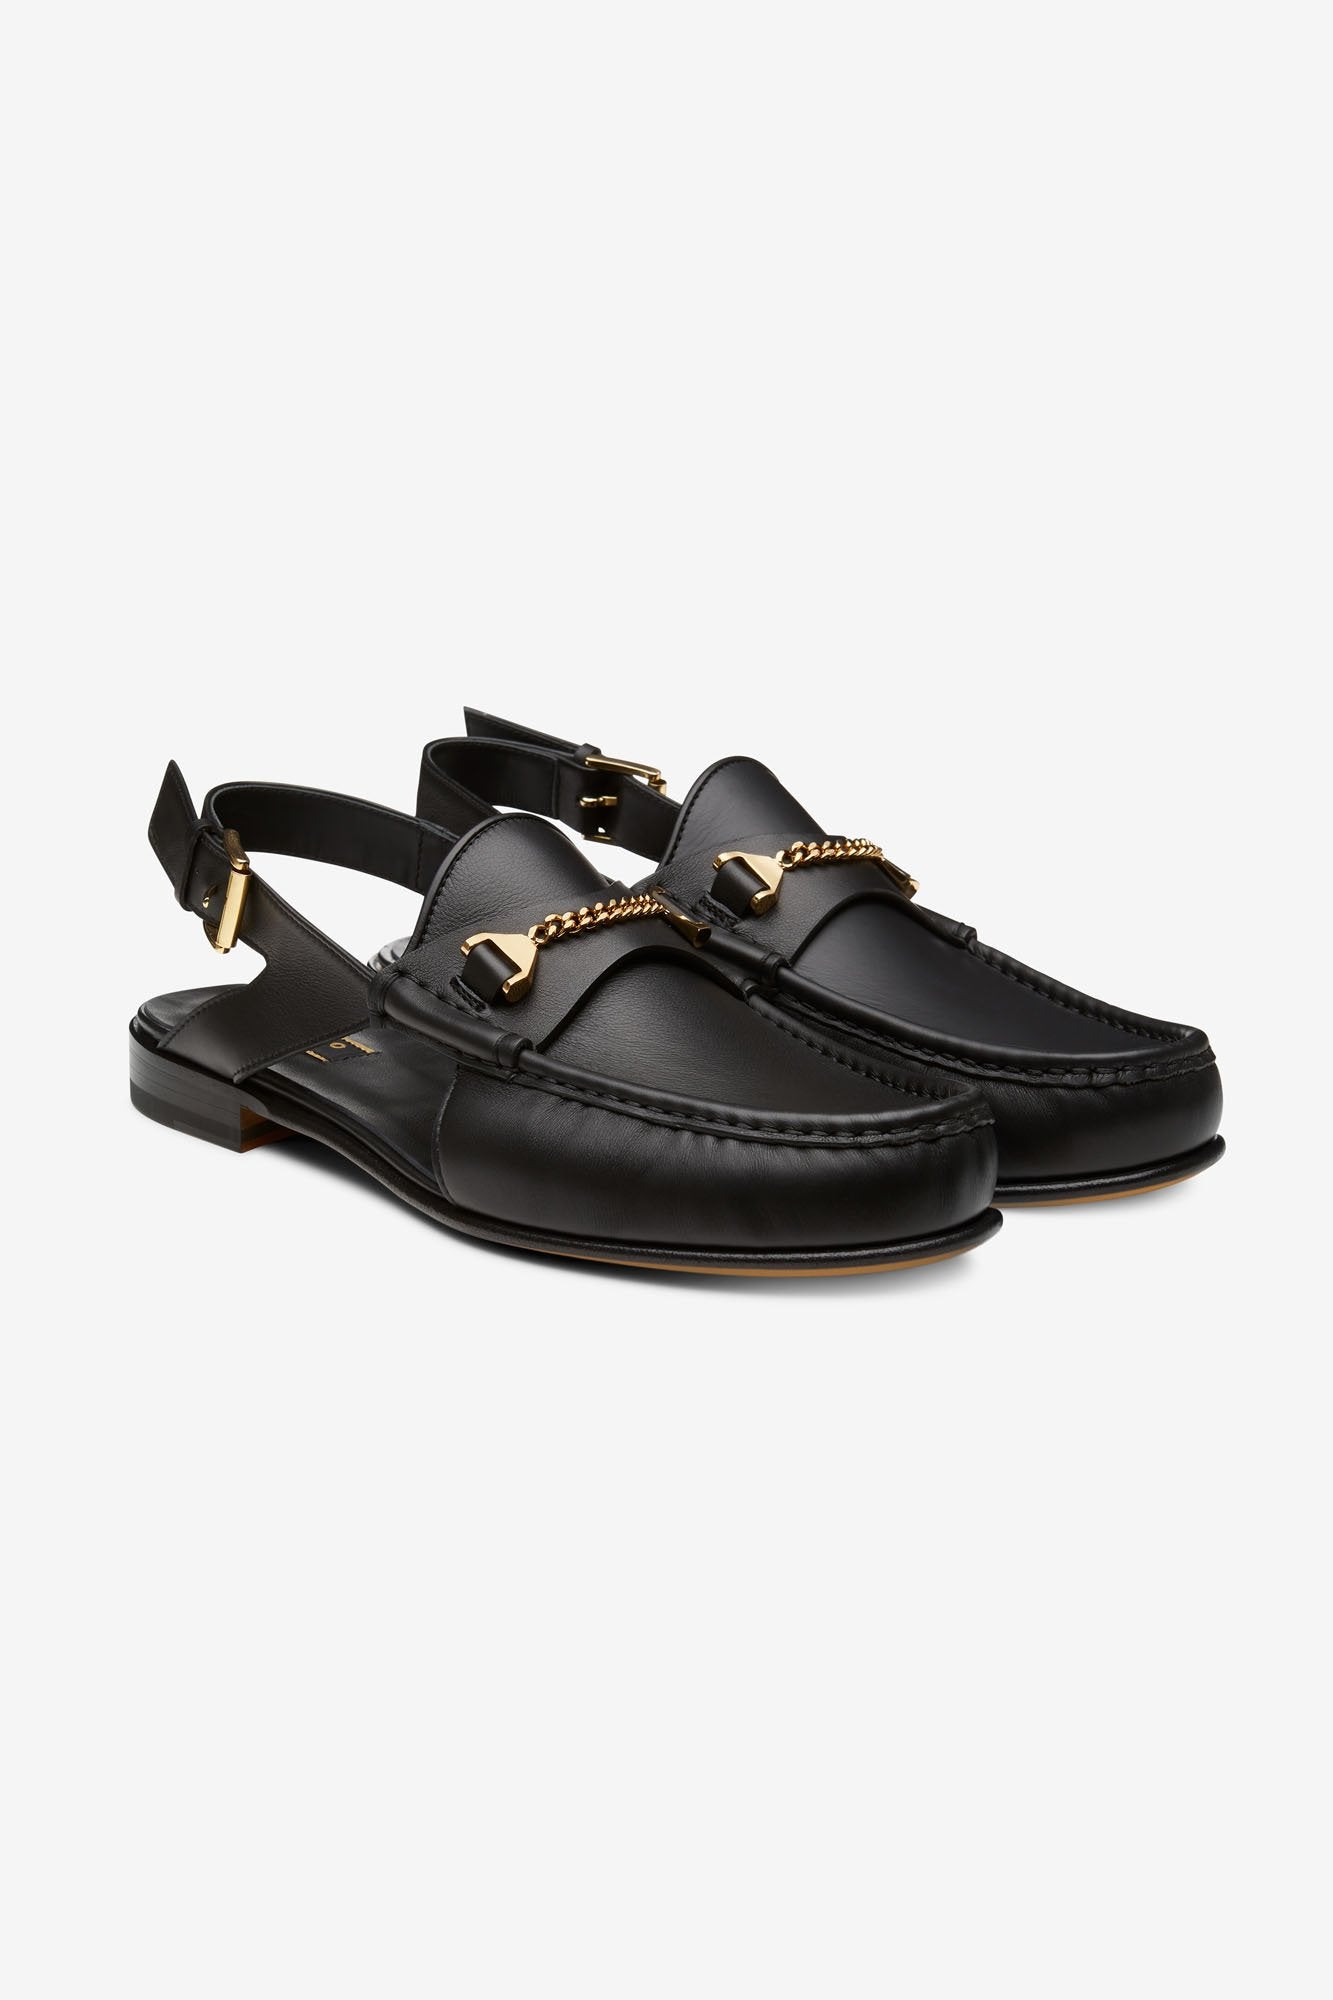 The Dude Moccasin Black Leather